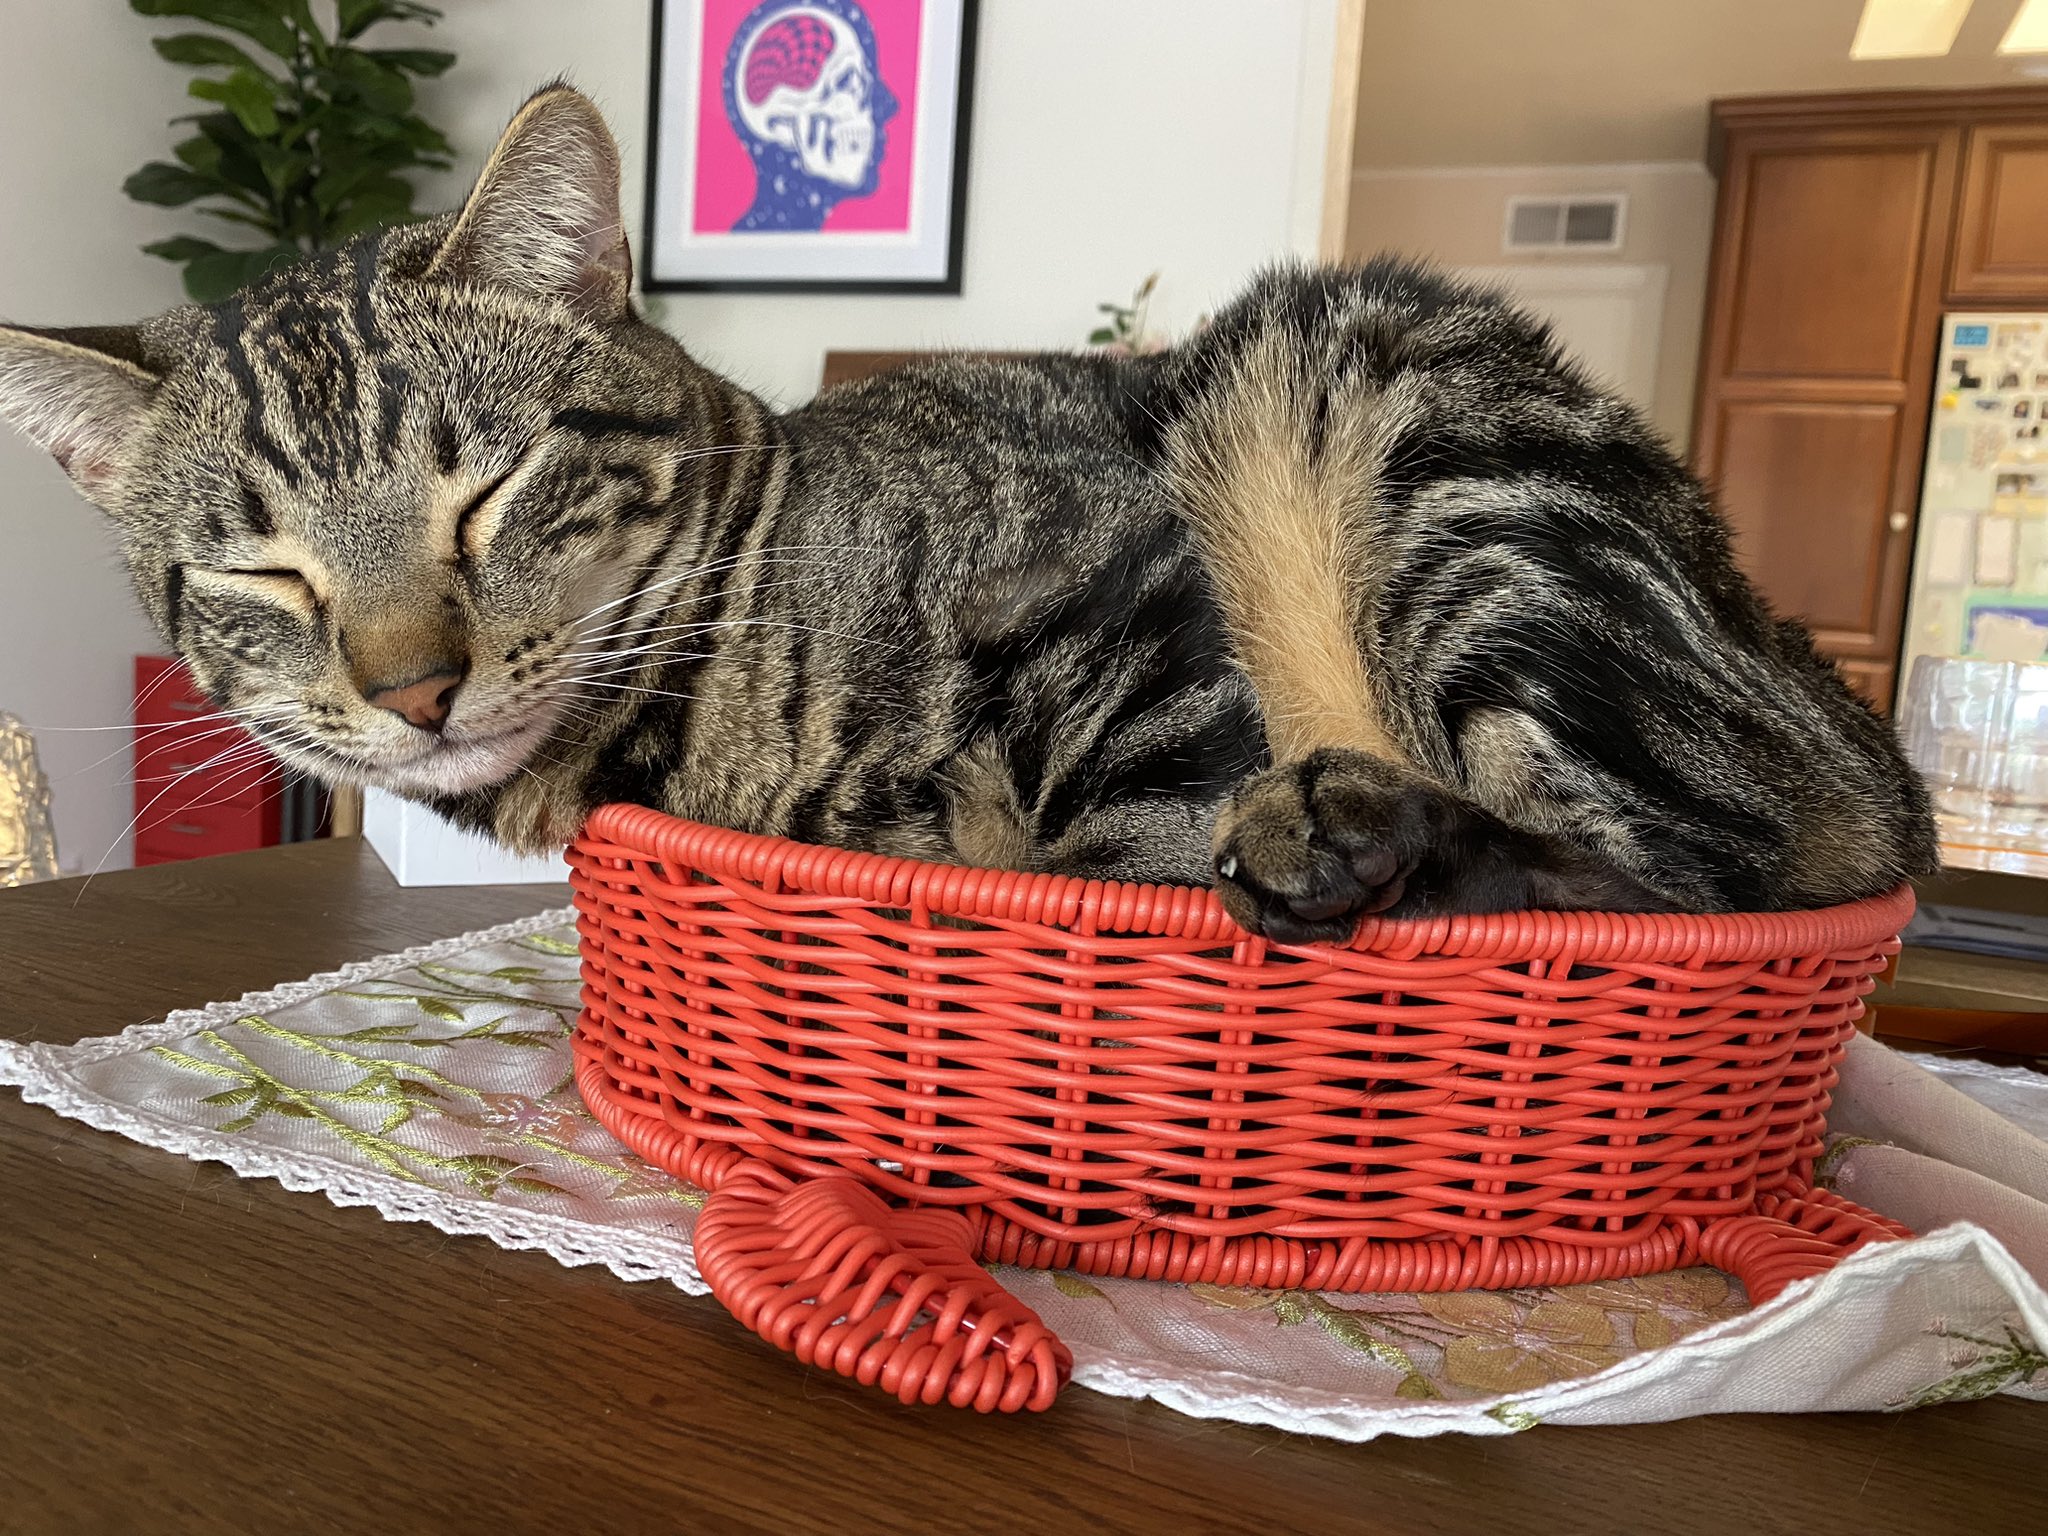 john noob on X: gooby always uses this crab-shaped basket as a bed, even  though he barely fits. And I always take a pic, even though my camera roll  is full of